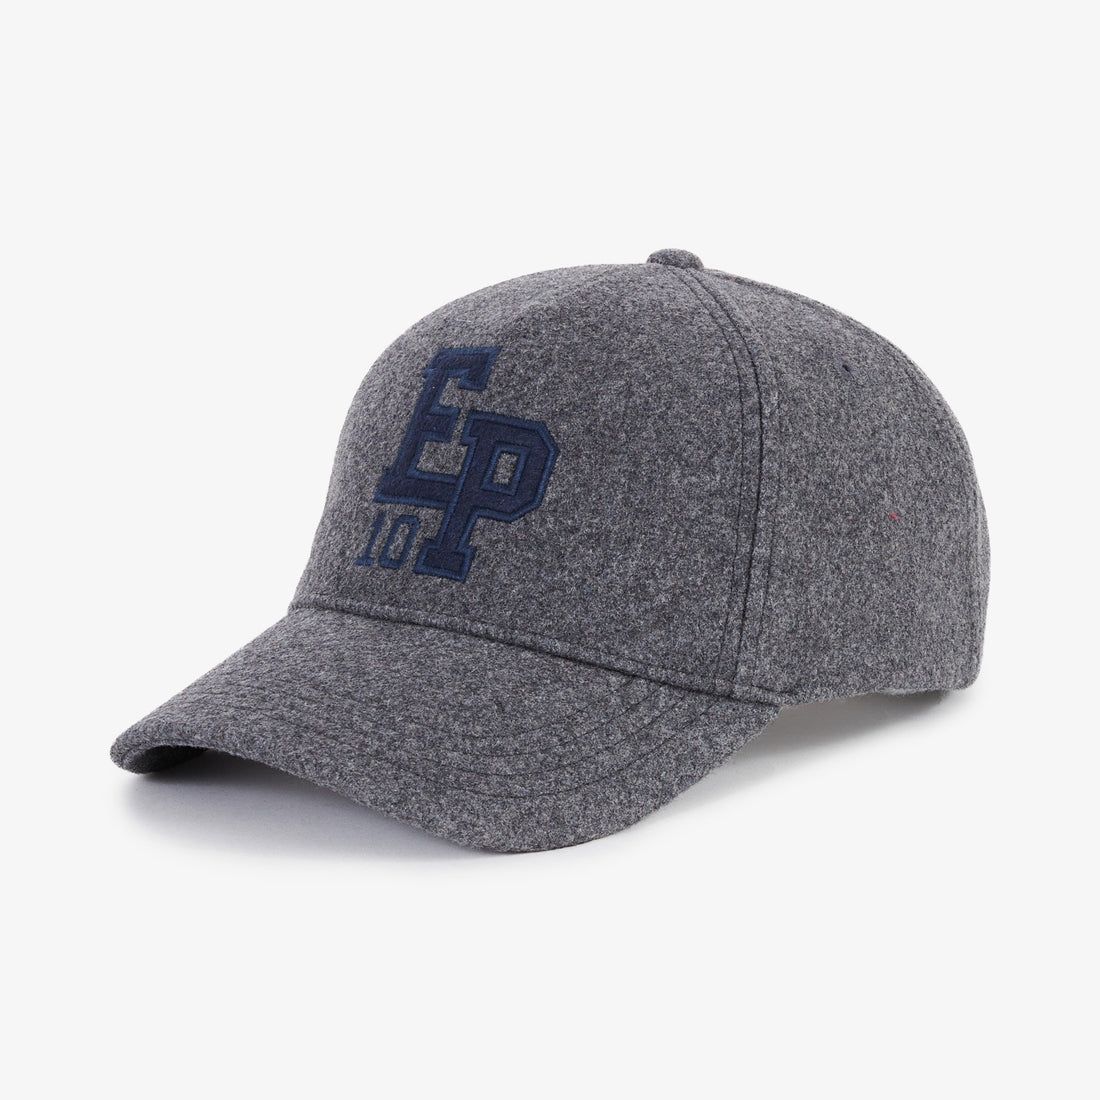 Grey Embroidered Cap With Patch_H23CHACA0009_GRM_01